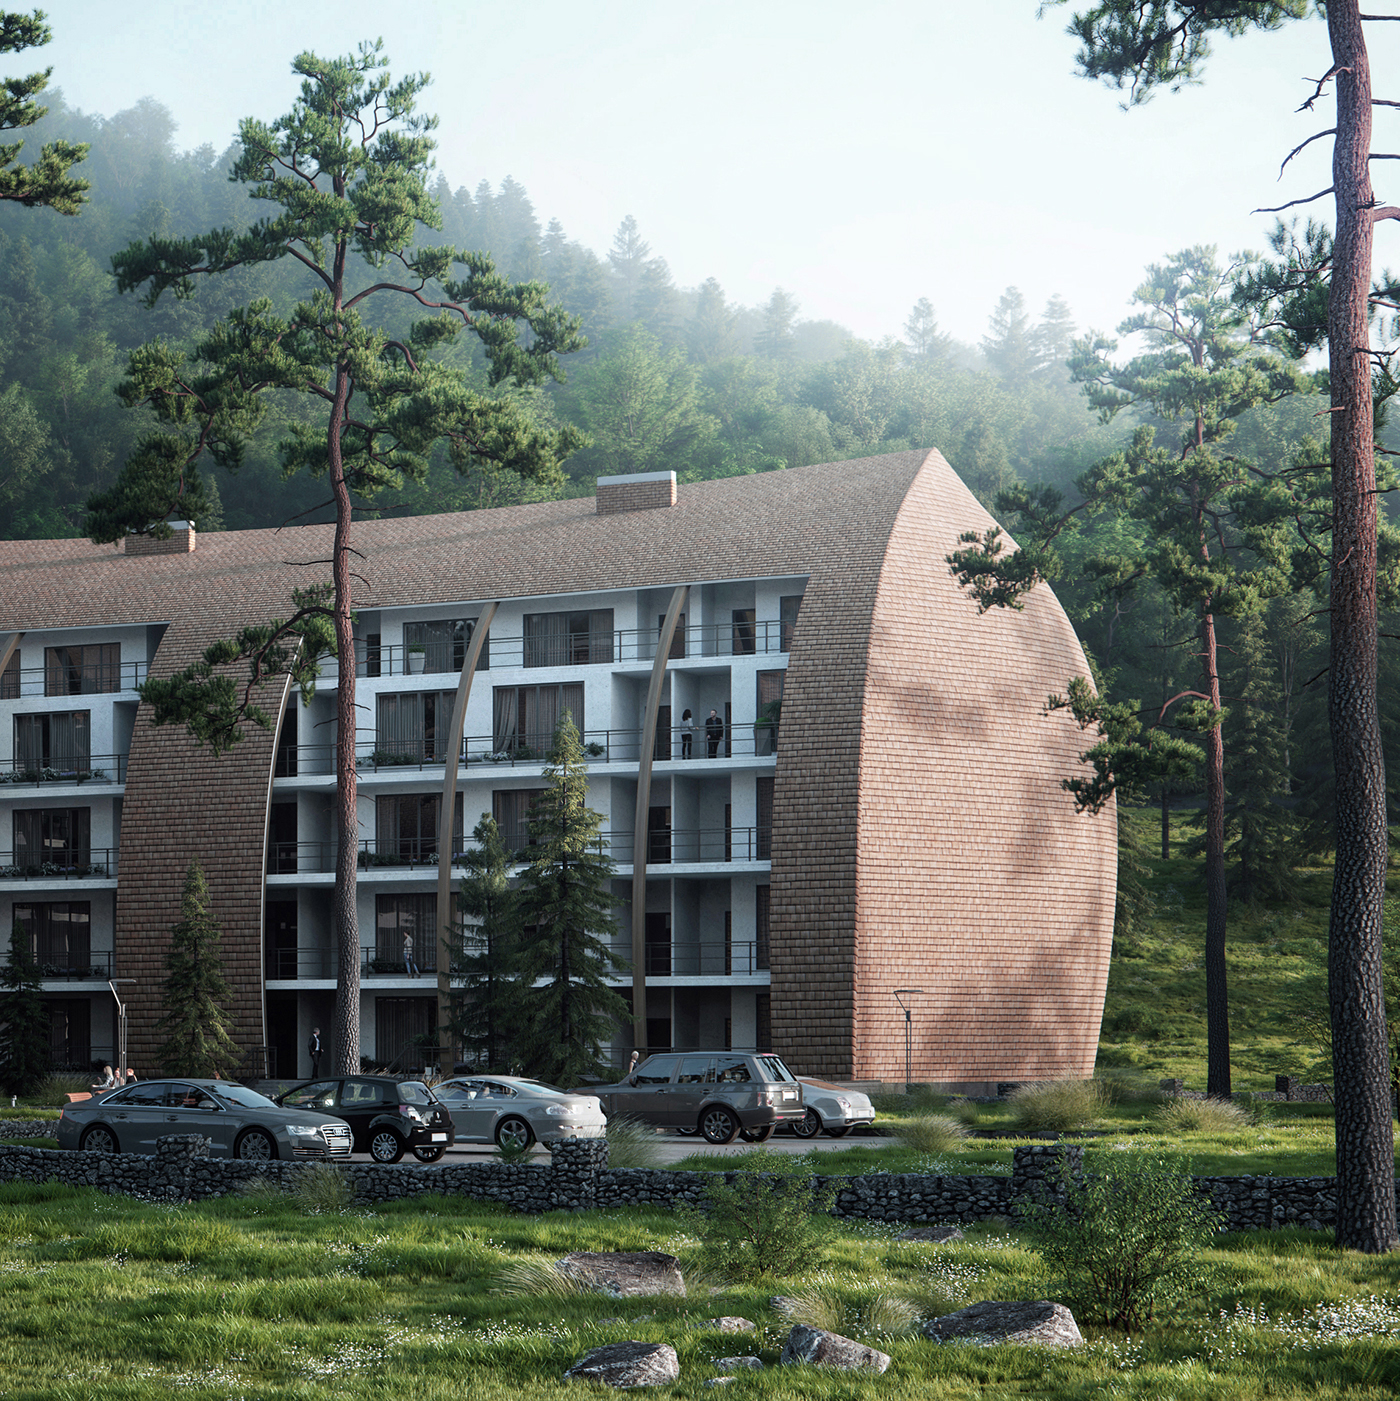 architecture Georgia residental complex housing forest environment mood lunas3d